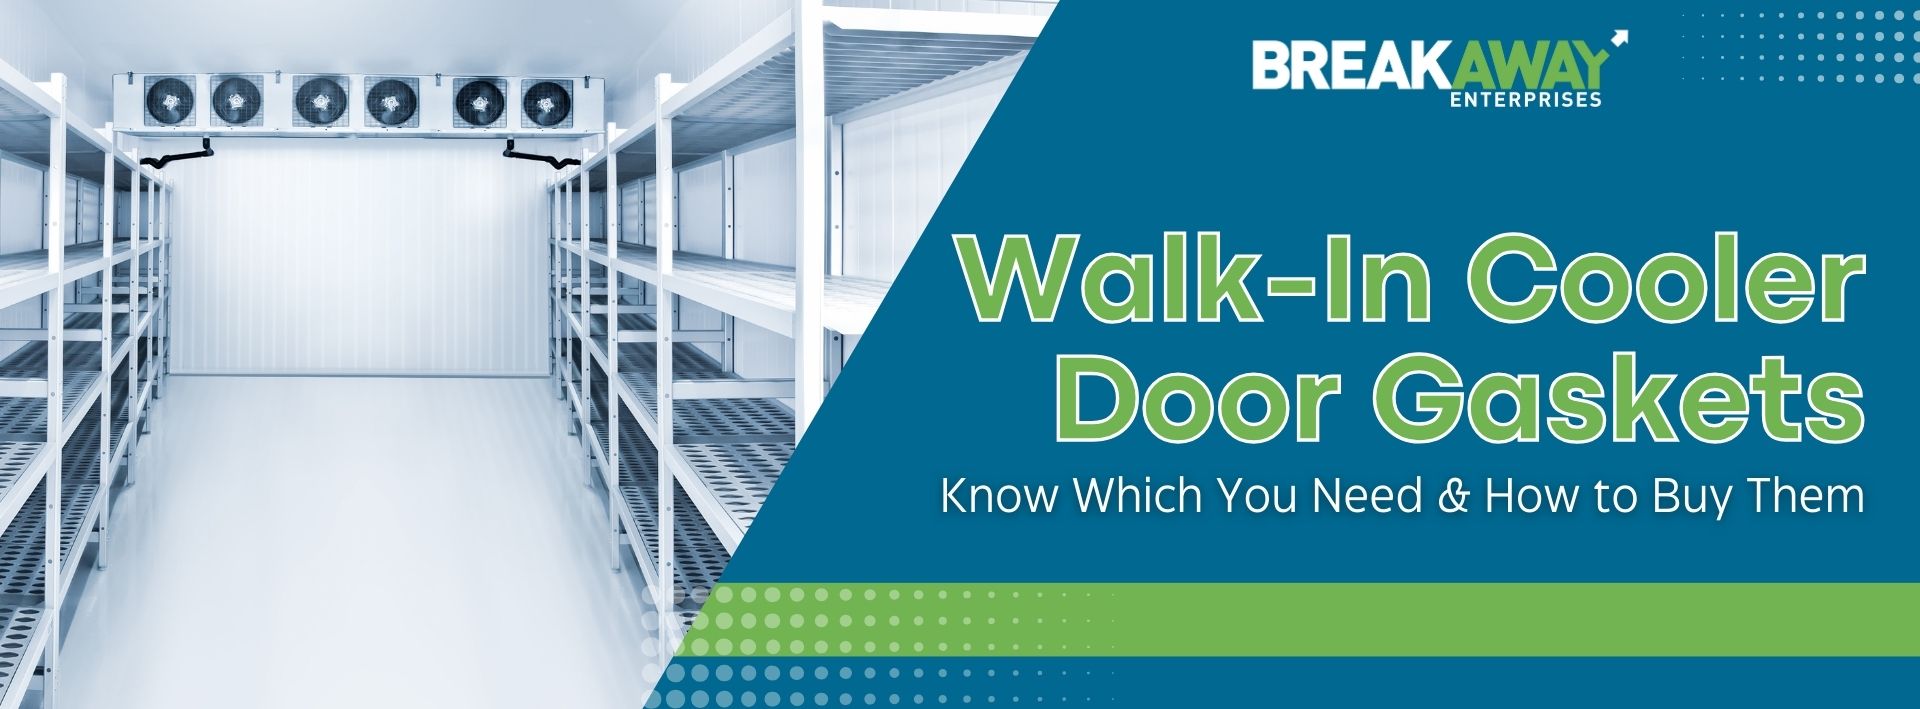 Walk-In Cooler Door Gaskets - How to Know Which You Need & Which to Buy